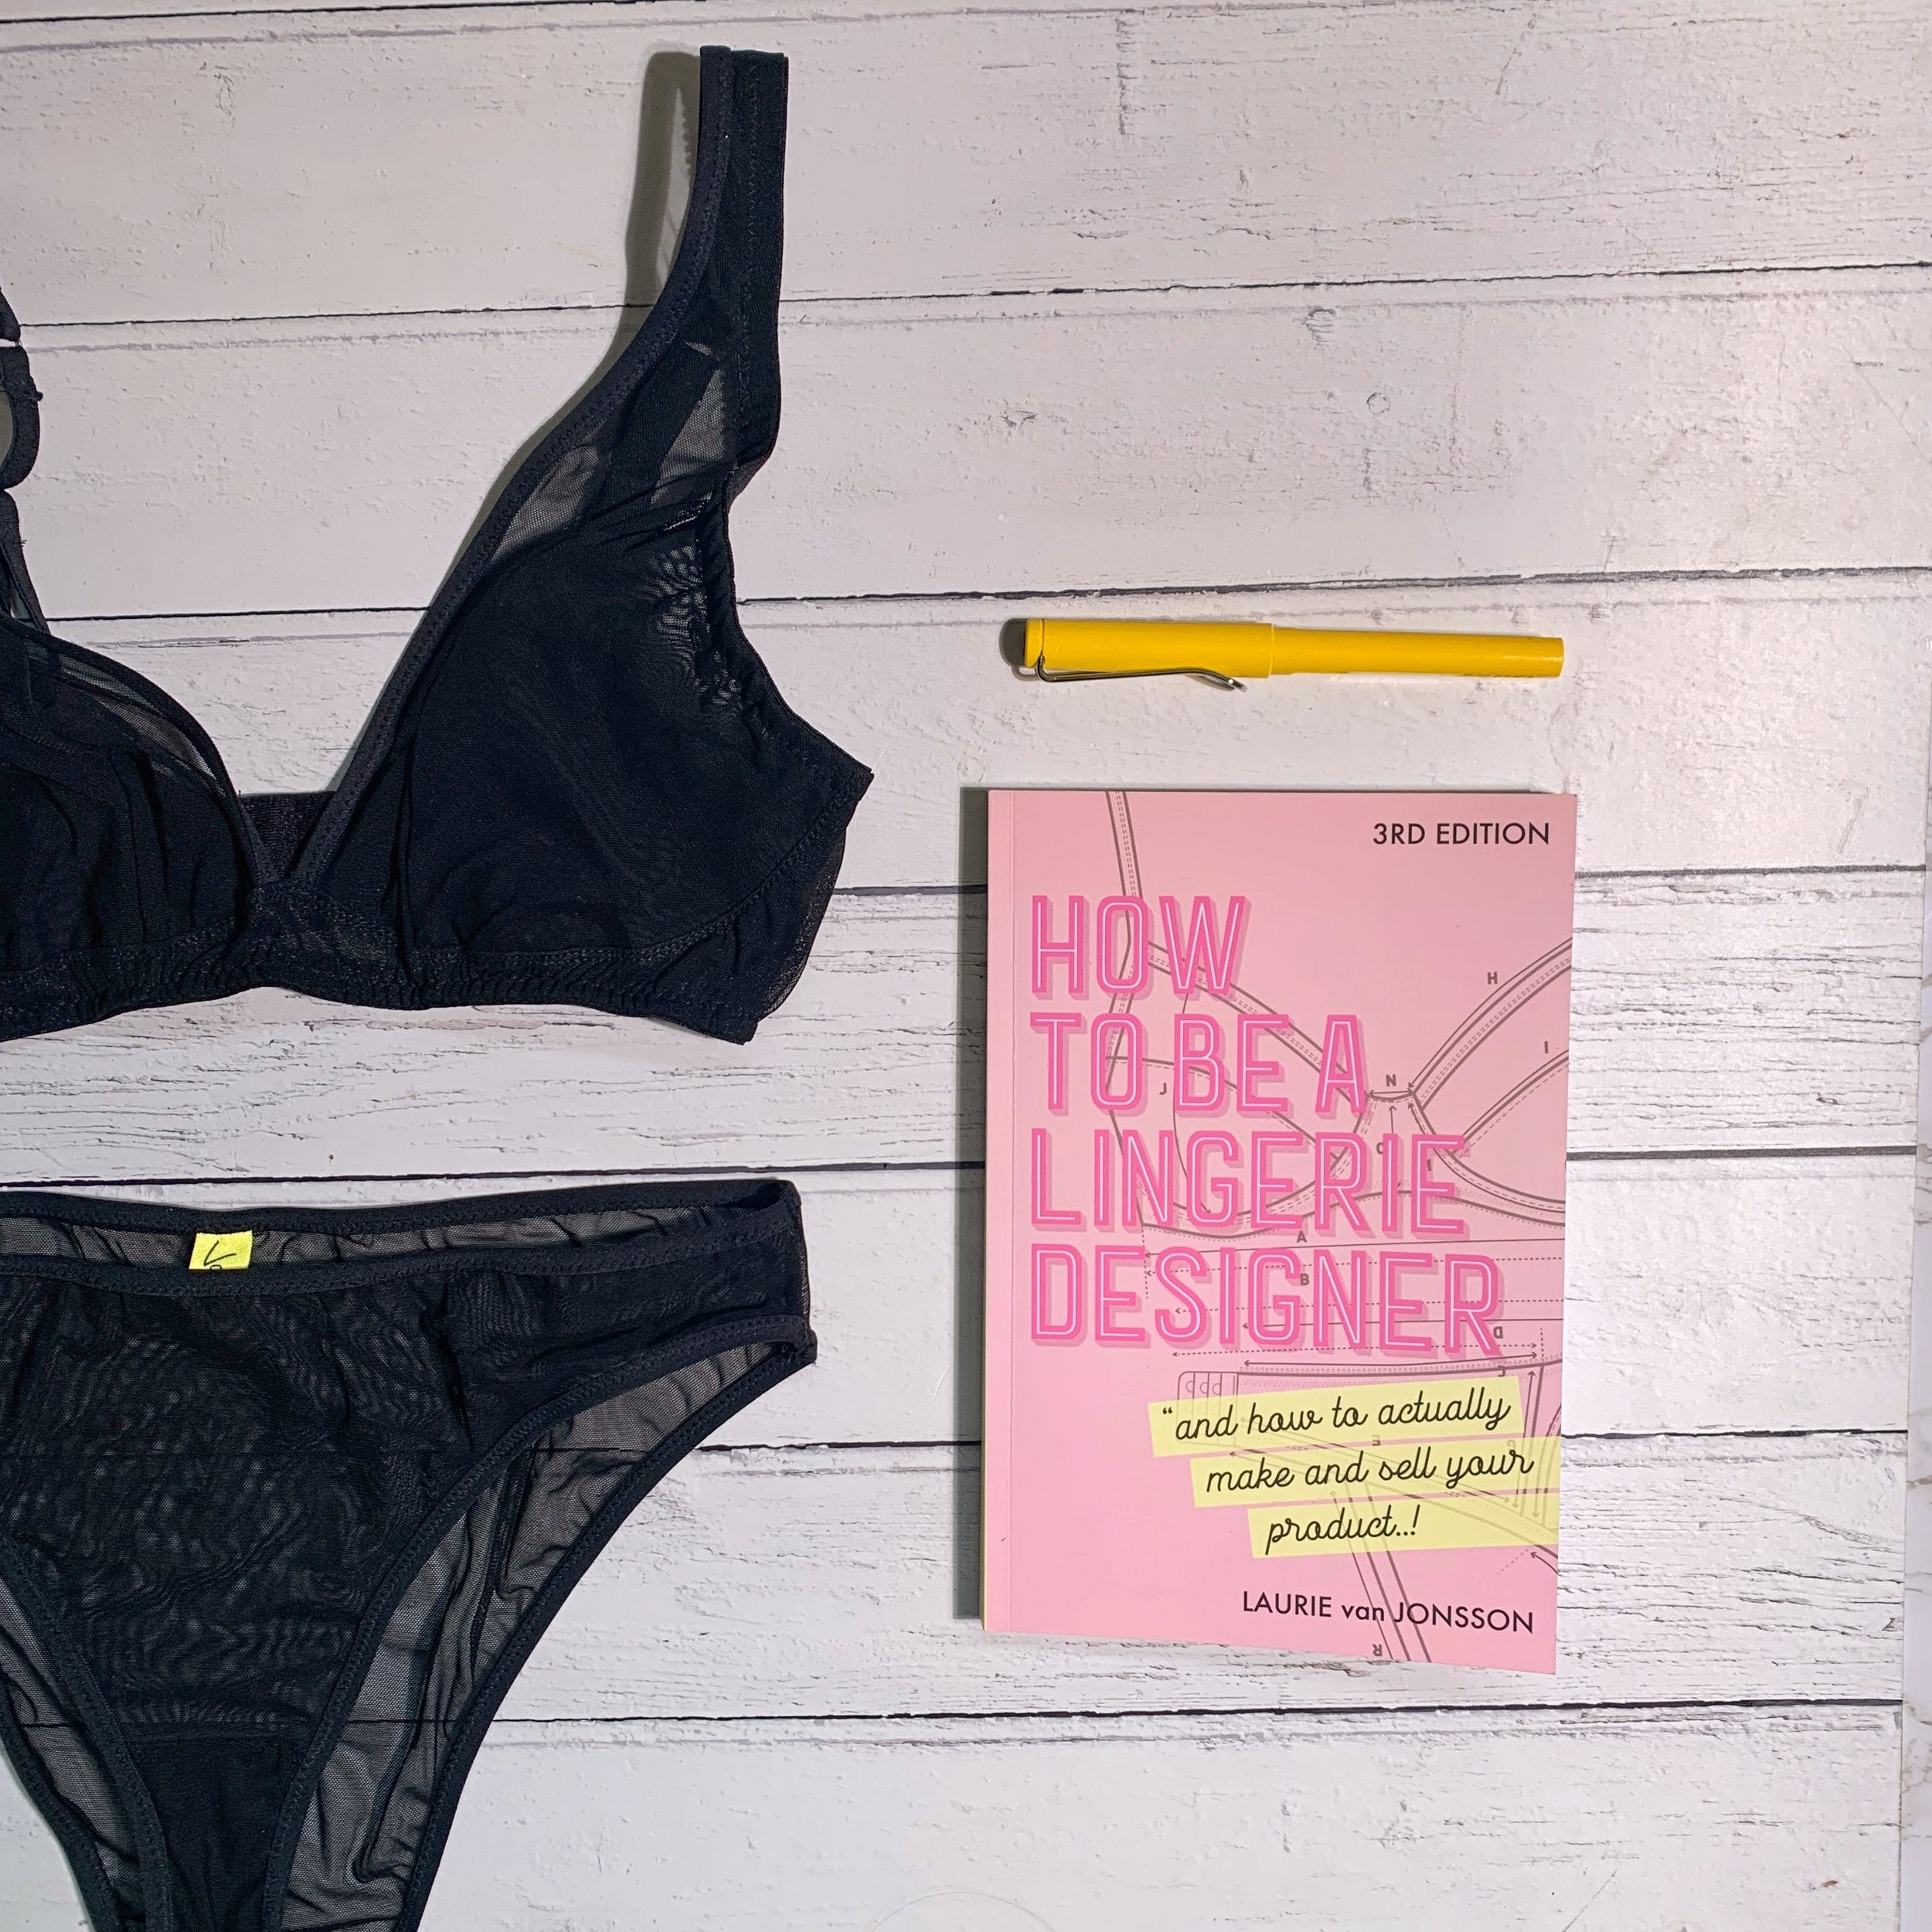 EBook: Van Jonsson Design- HOW TO BE A LINGERIE DESIGNER (and how to actually make and sell your product)